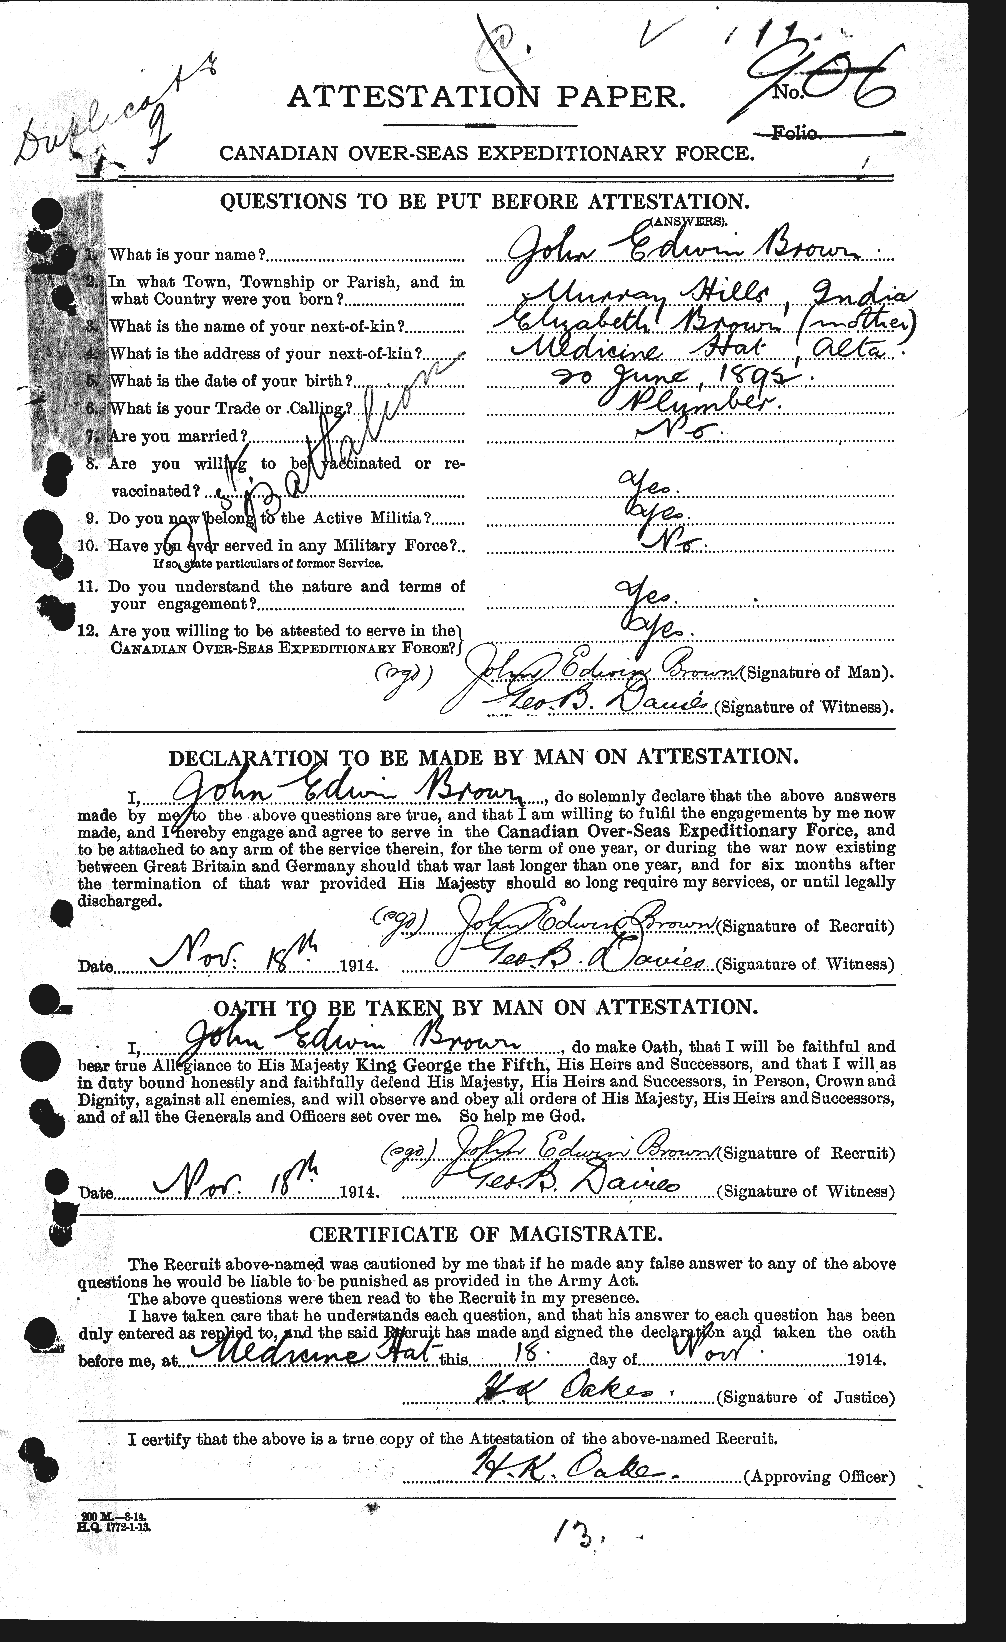 Personnel Records of the First World War - CEF 264591a